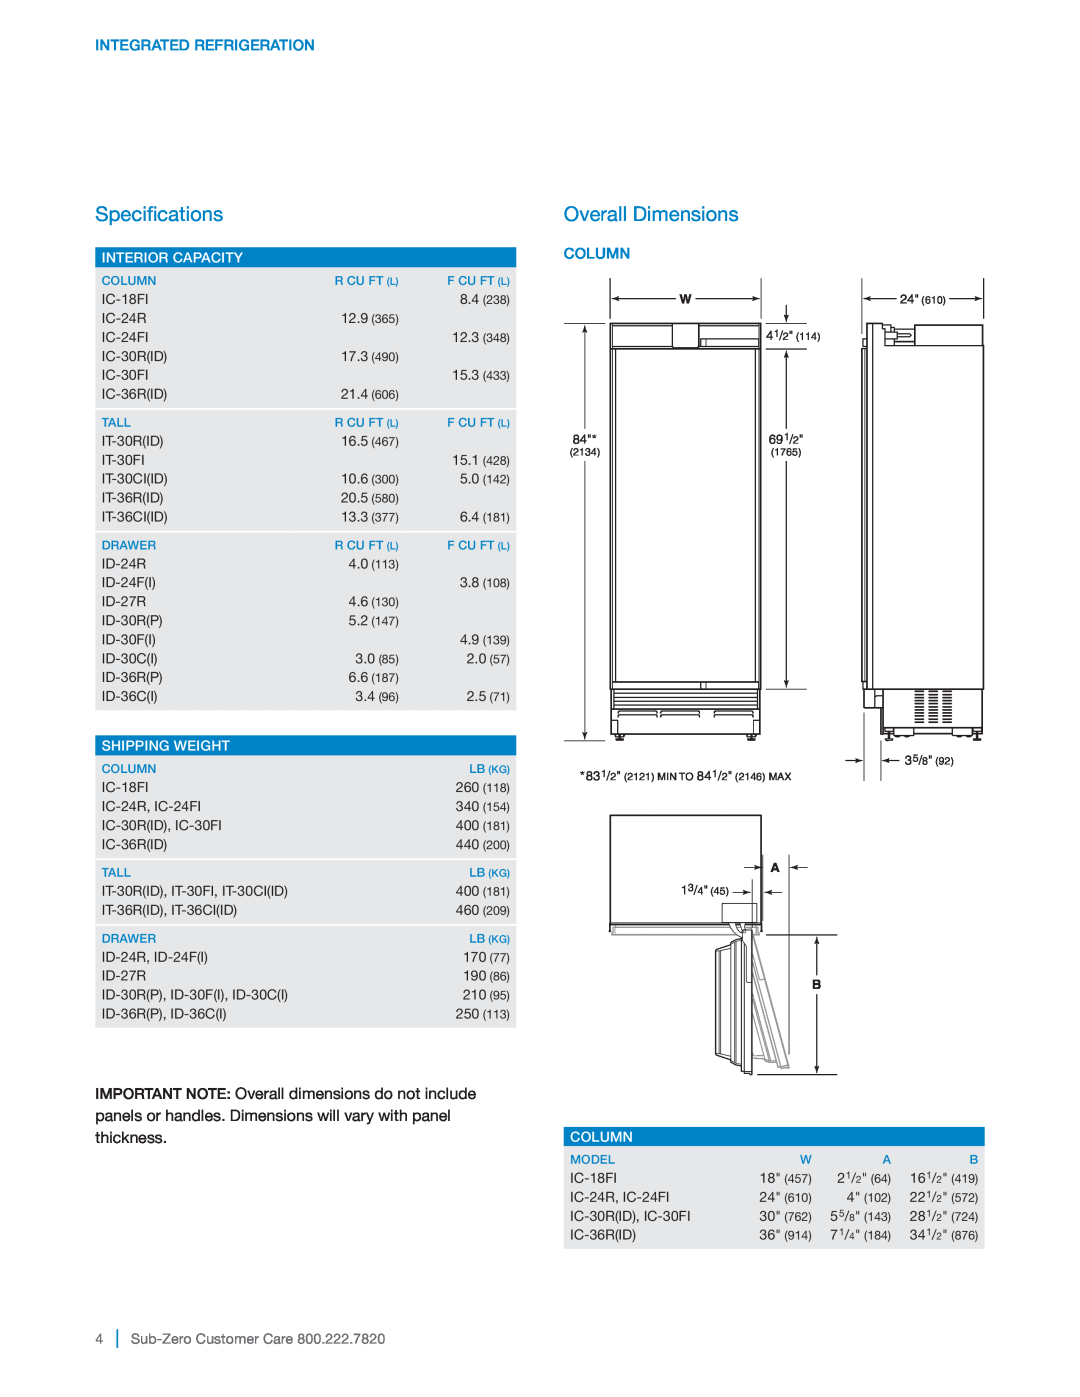 Sub-Zero IC-18F Specifications, Overall Dimensions, Integrated Refrigeration, Interior Capacity, Shipping Weight, Column 